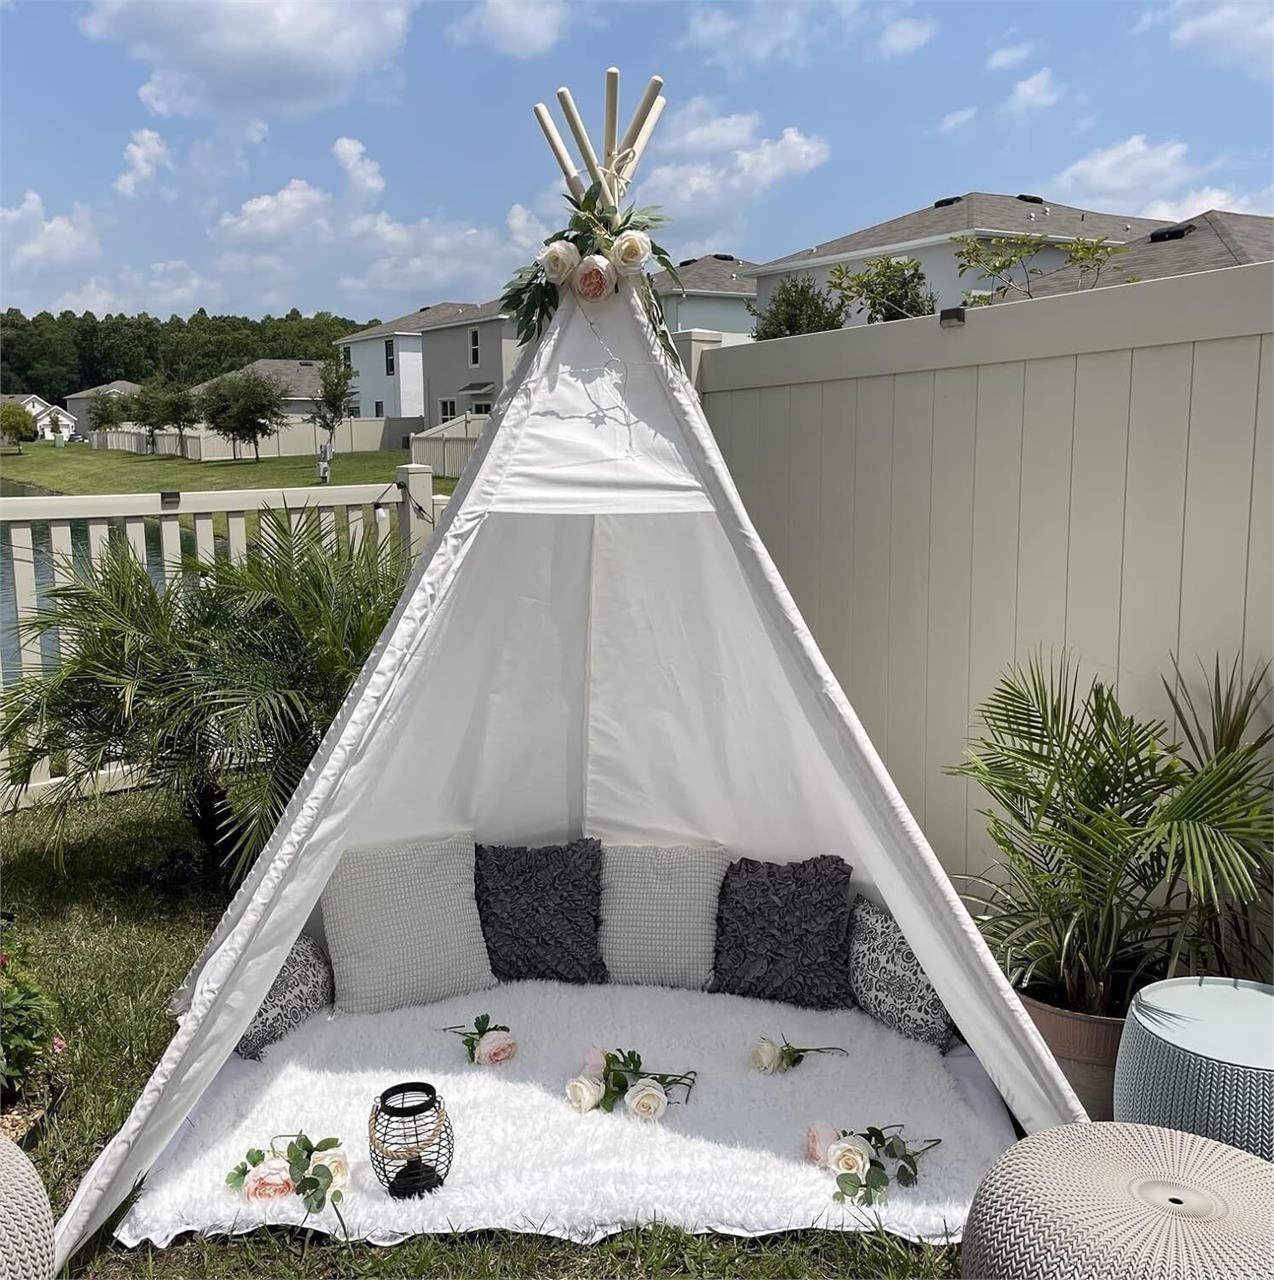 7' Teepee Tent for Adults, 5 Sided, White